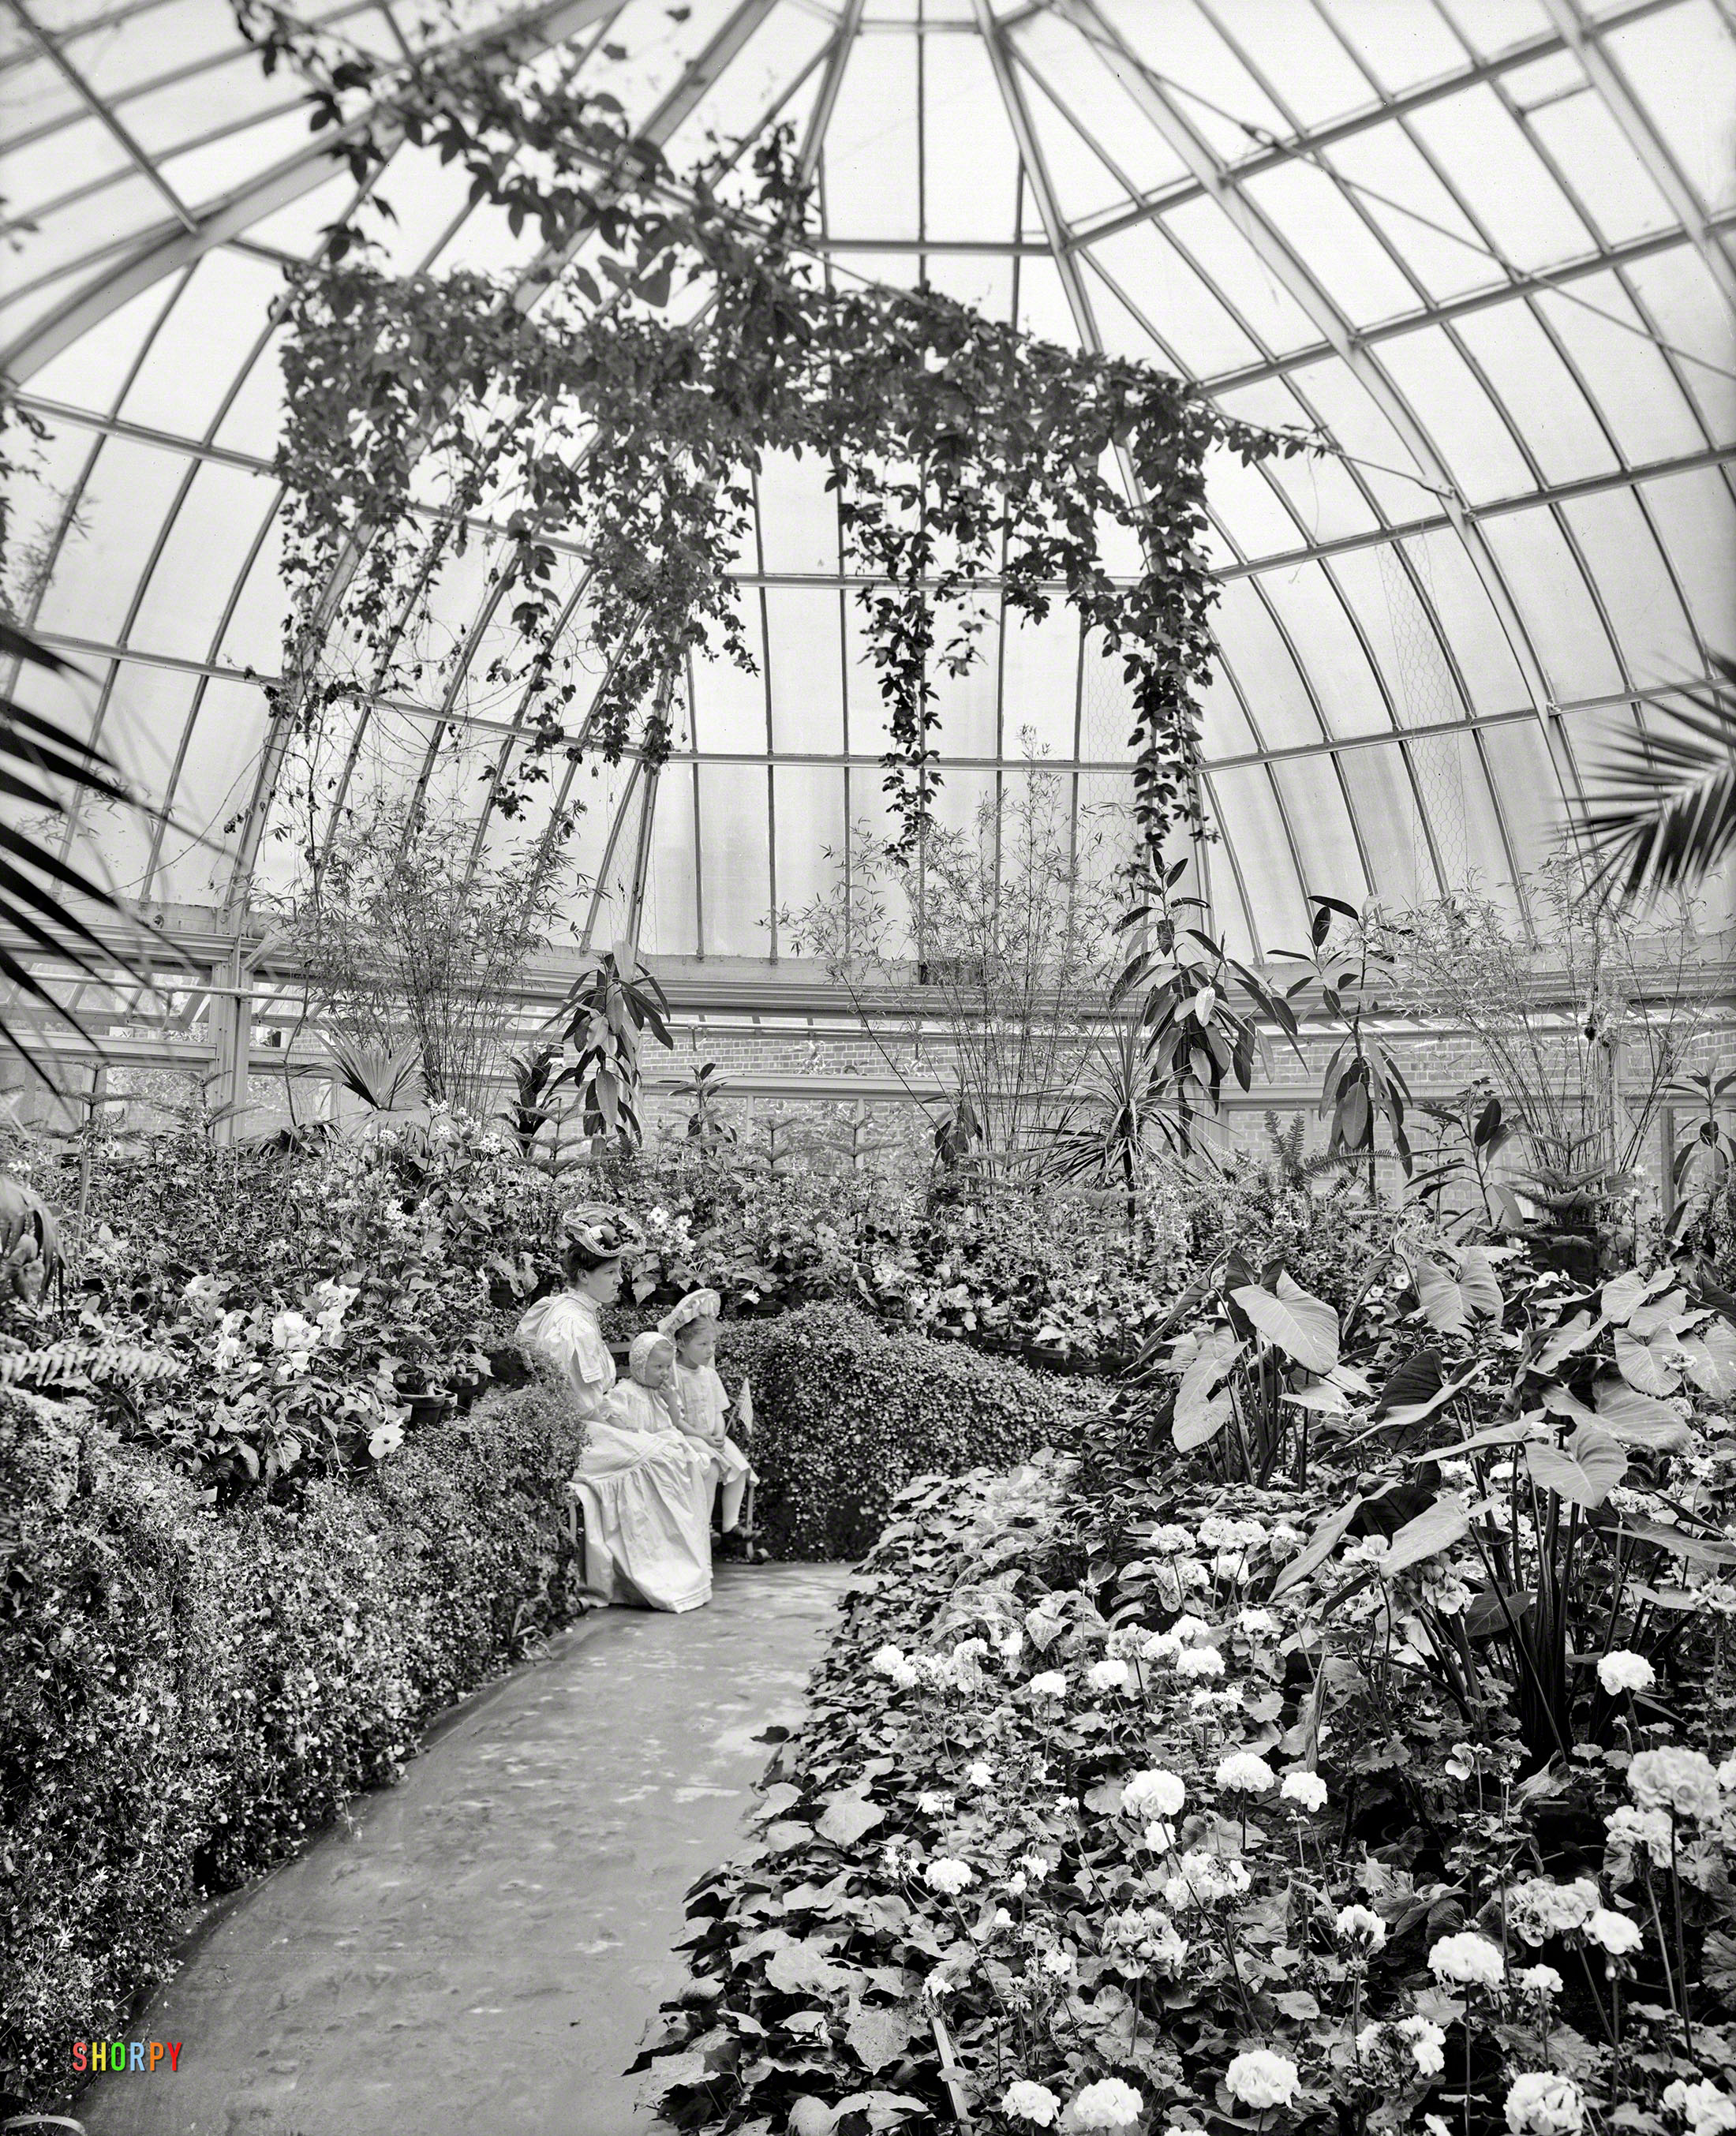 Detroit circa 1907. "Horticultural Building, Belle Isle Park." Check out their latest Vine. 8x10 inch glass negative, Detroit Publishing Company. View full size.